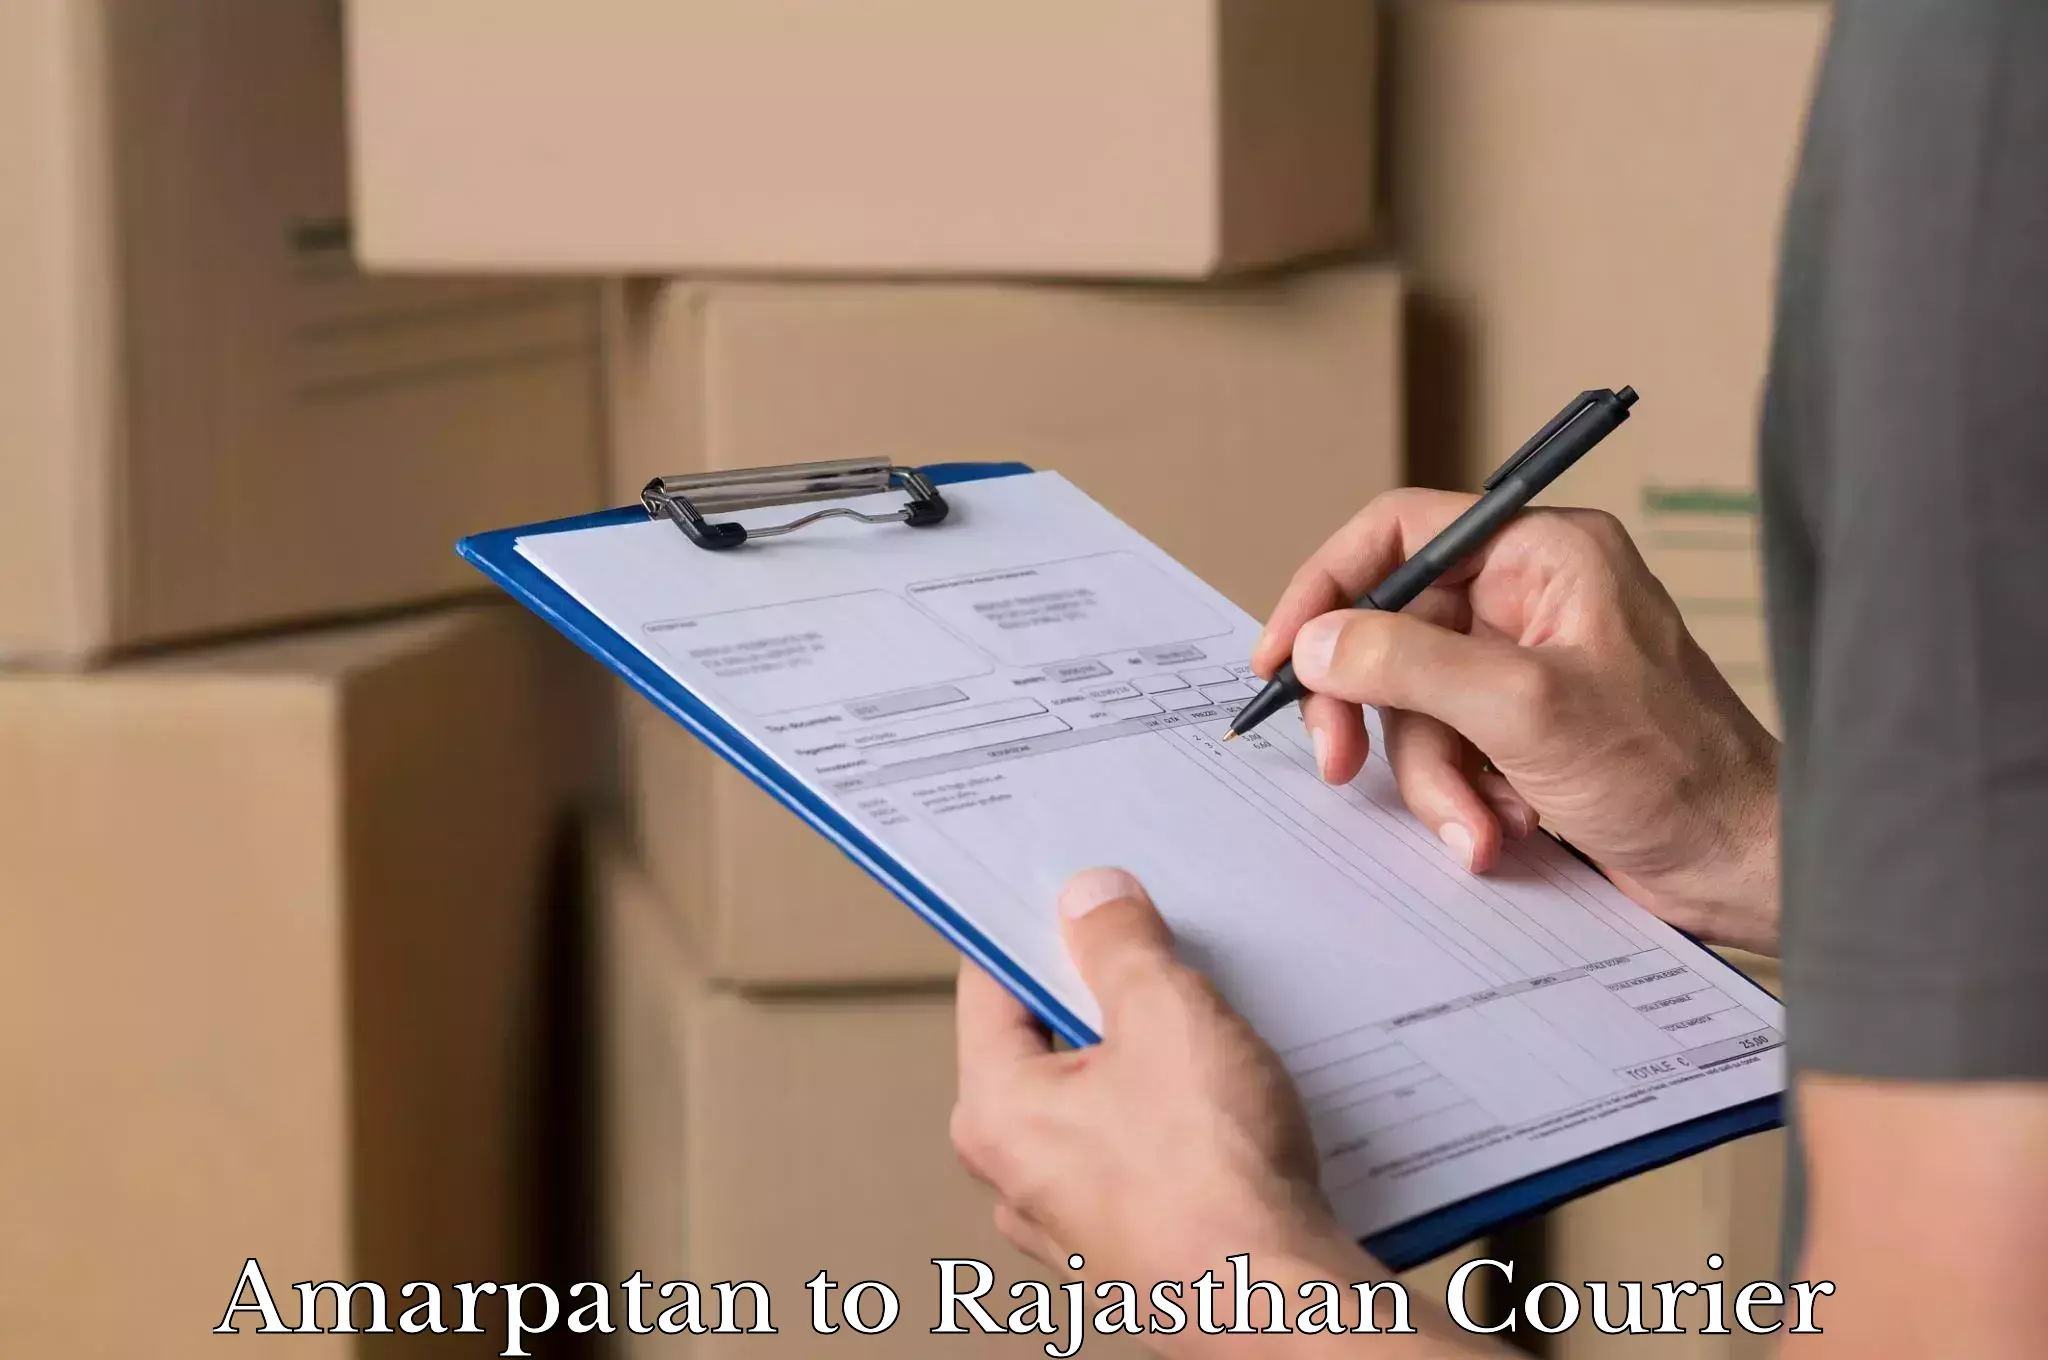 Luggage shipment specialists Amarpatan to Rajasthan